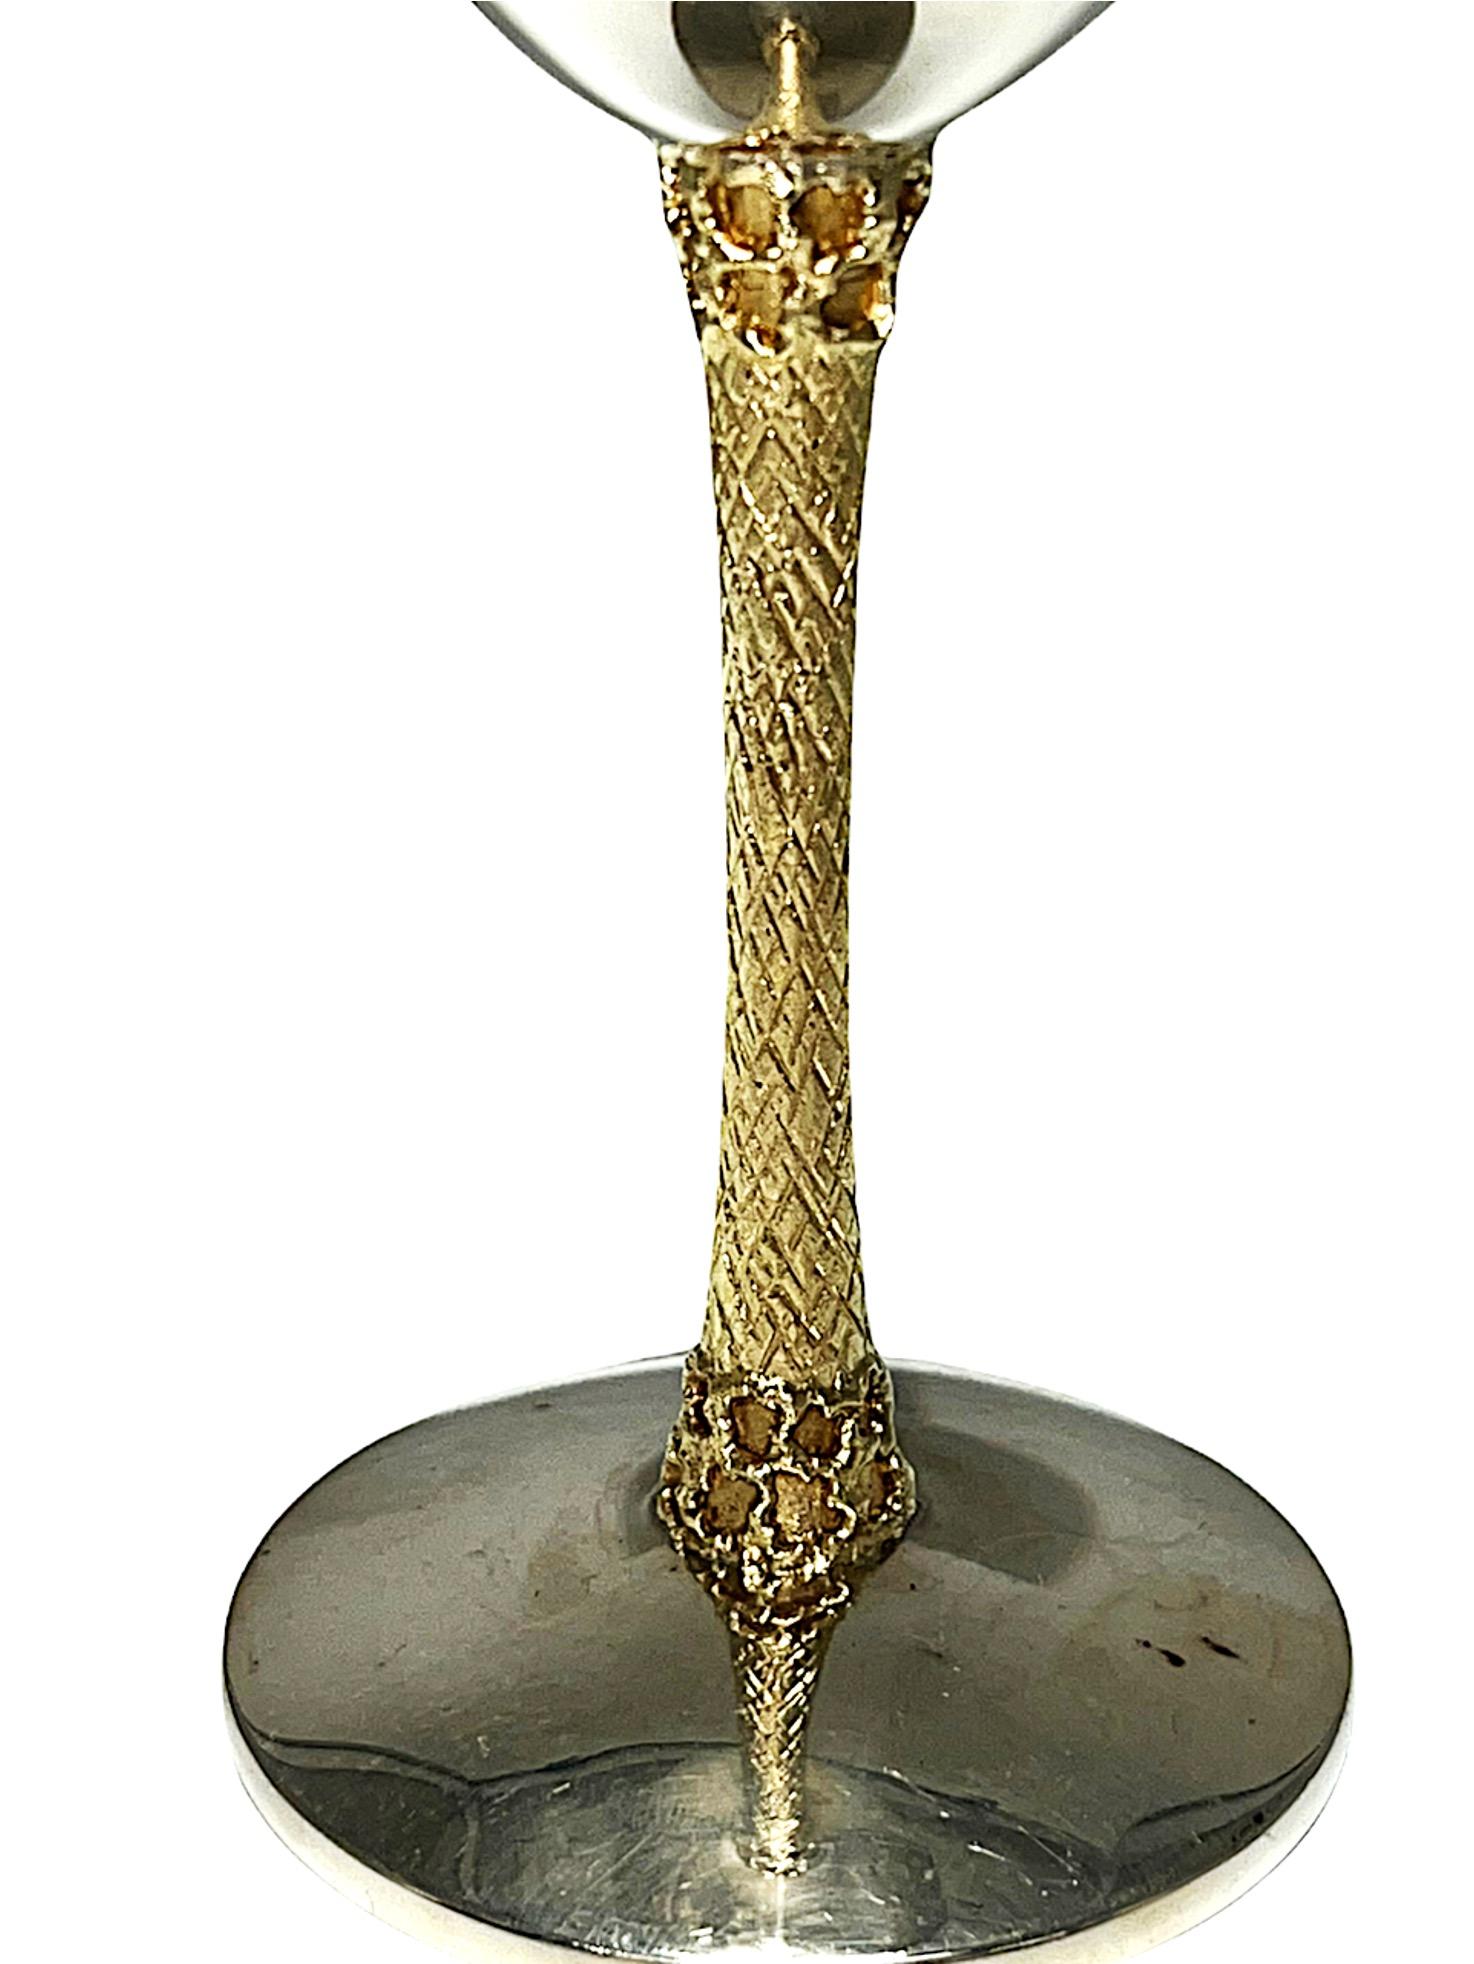 A set of twelve English parcel-gilt silver wine Globets by Devlin Staurt, London, 1970 / 1976. The taller are marked on rims of bowls, and the shorter are marked on bases. The six taller are designed with a gilt textured stems and bases, and the